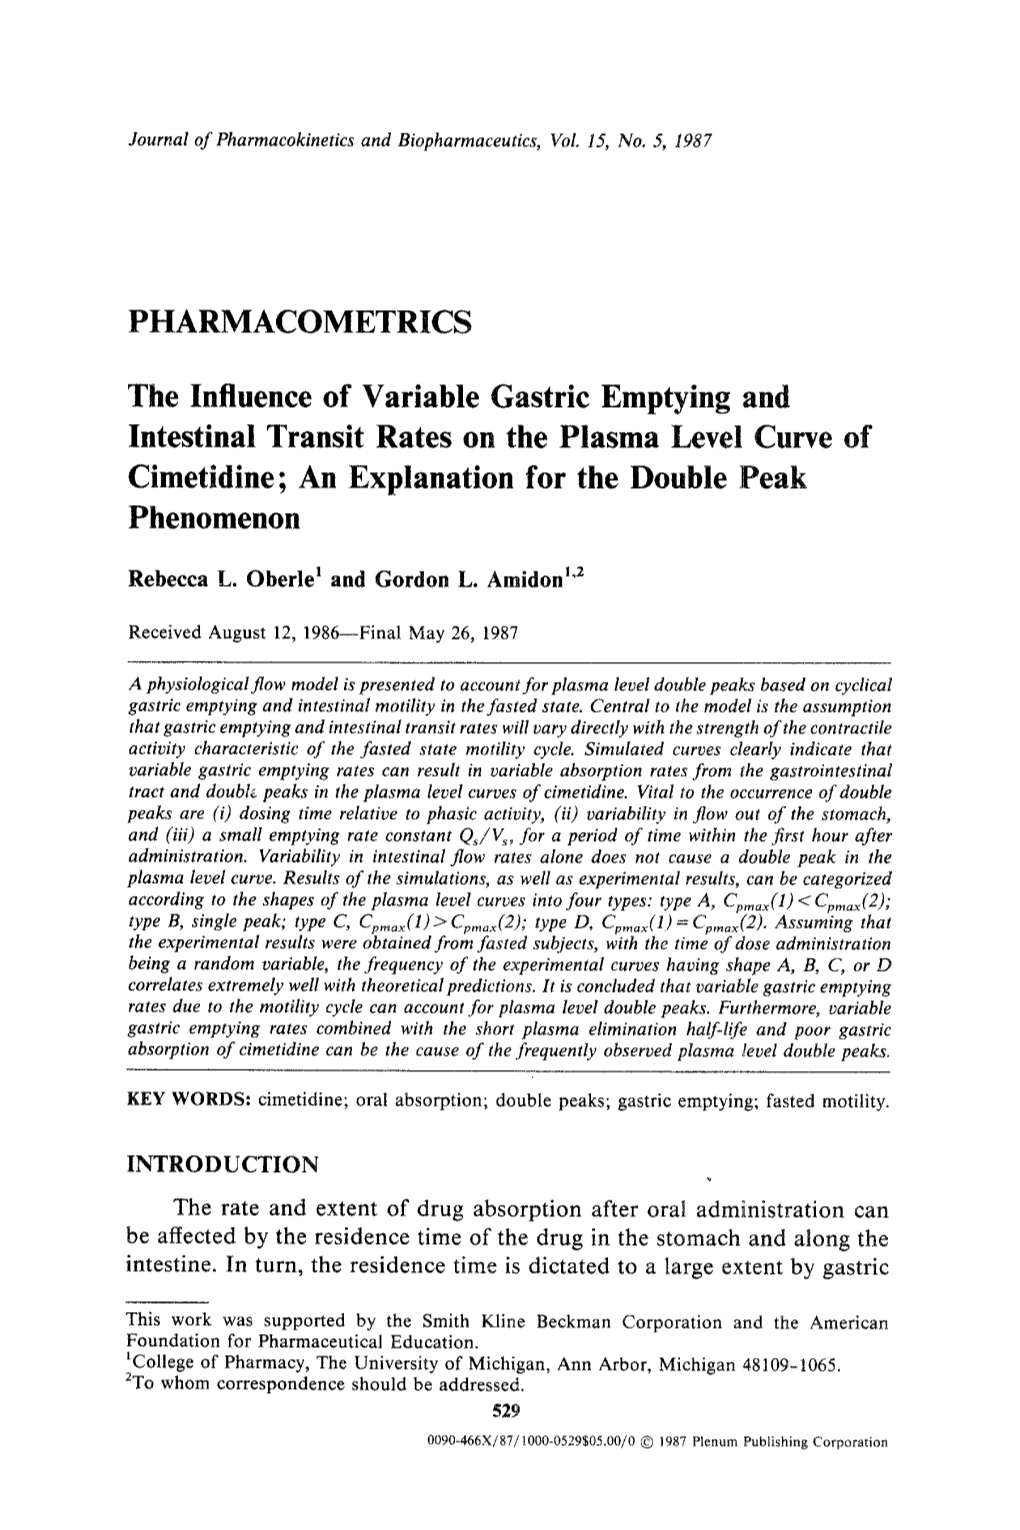 The Influence of Variable Gastric Emptying and Intestinal Transit Rates on the Plasma Level Curve of Cimetidine; an Explanation for the Double Peak Phenomenon